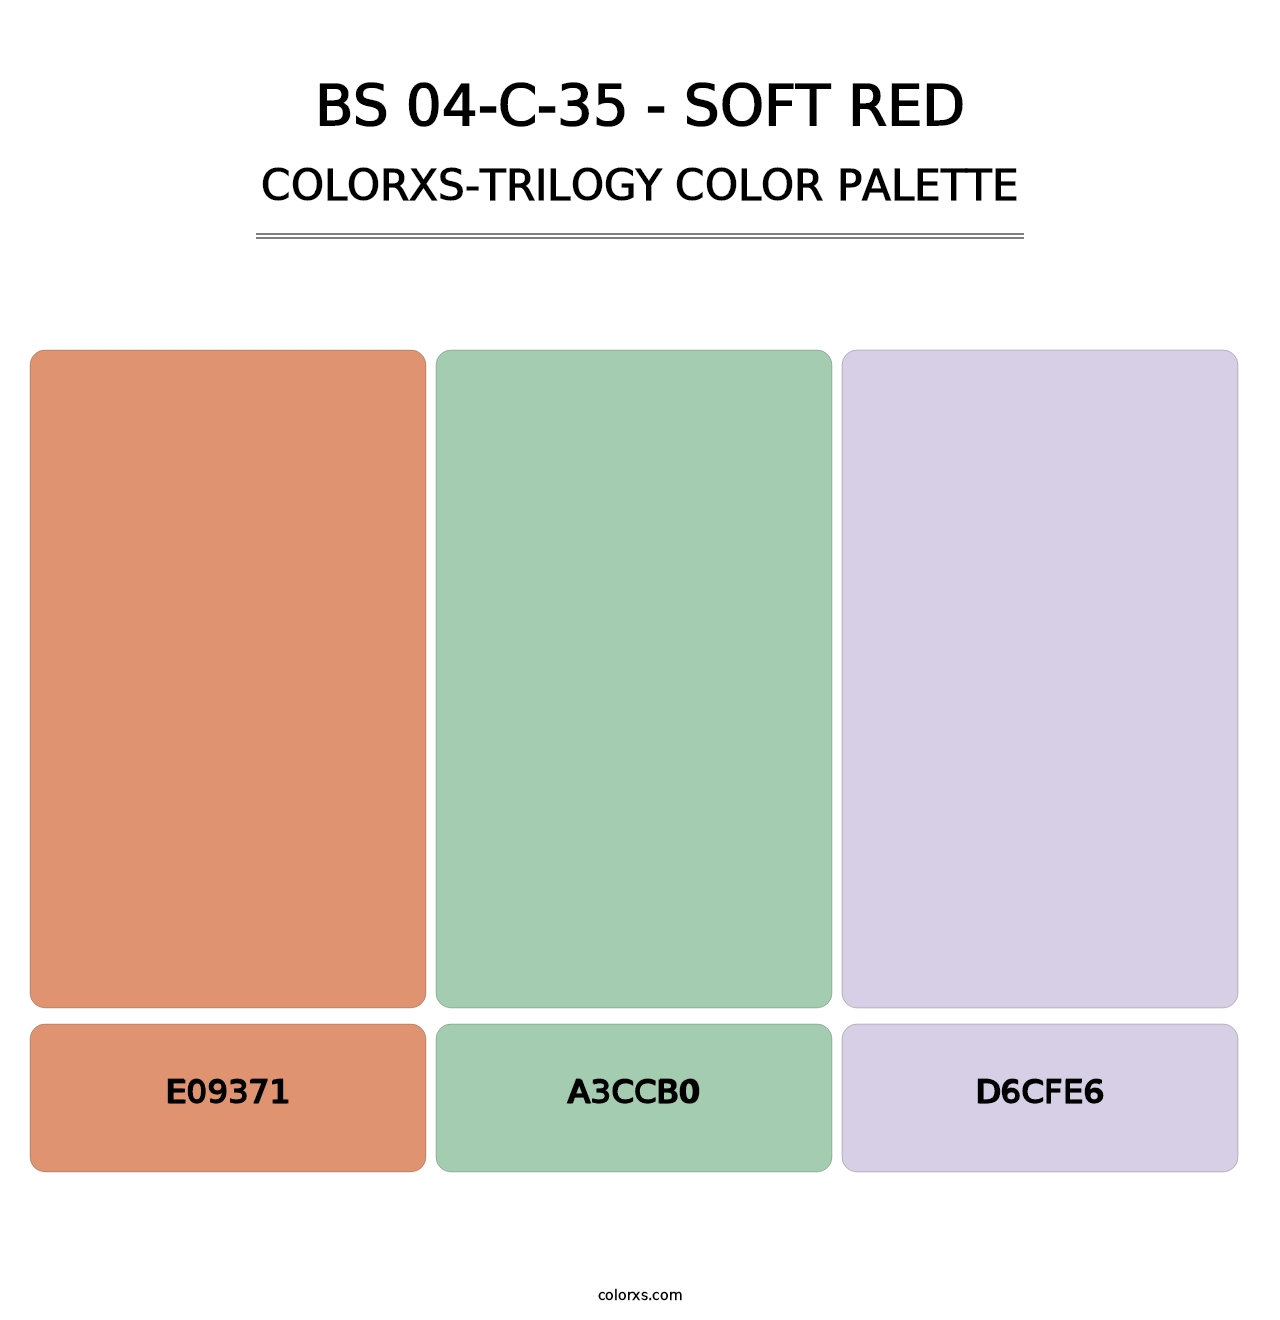 BS 04-C-35 - Soft Red - Colorxs Trilogy Palette